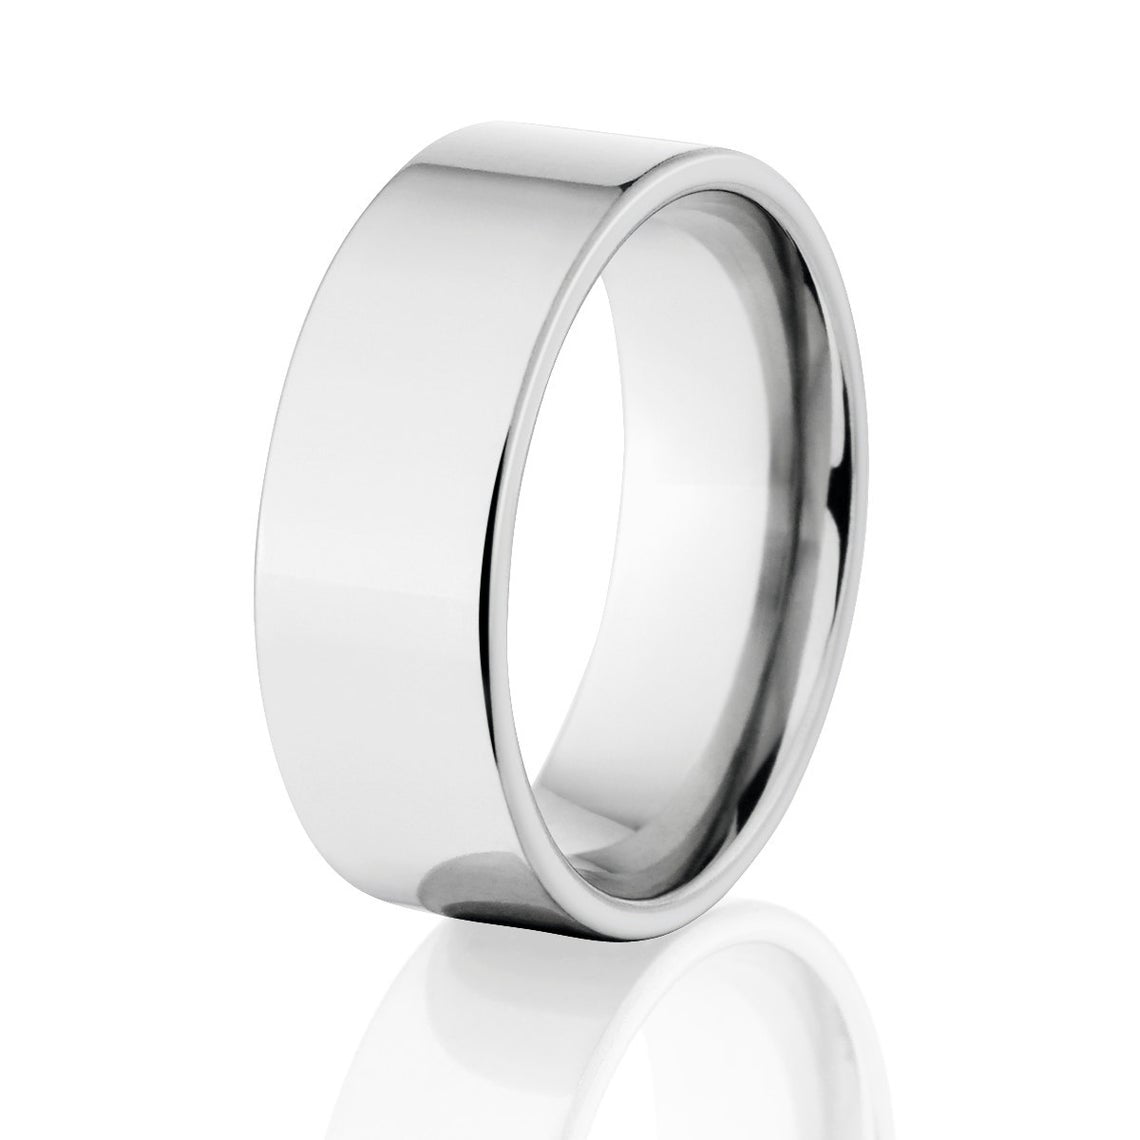 8mm wide cobalt wedding band with a polish finish and flat profile